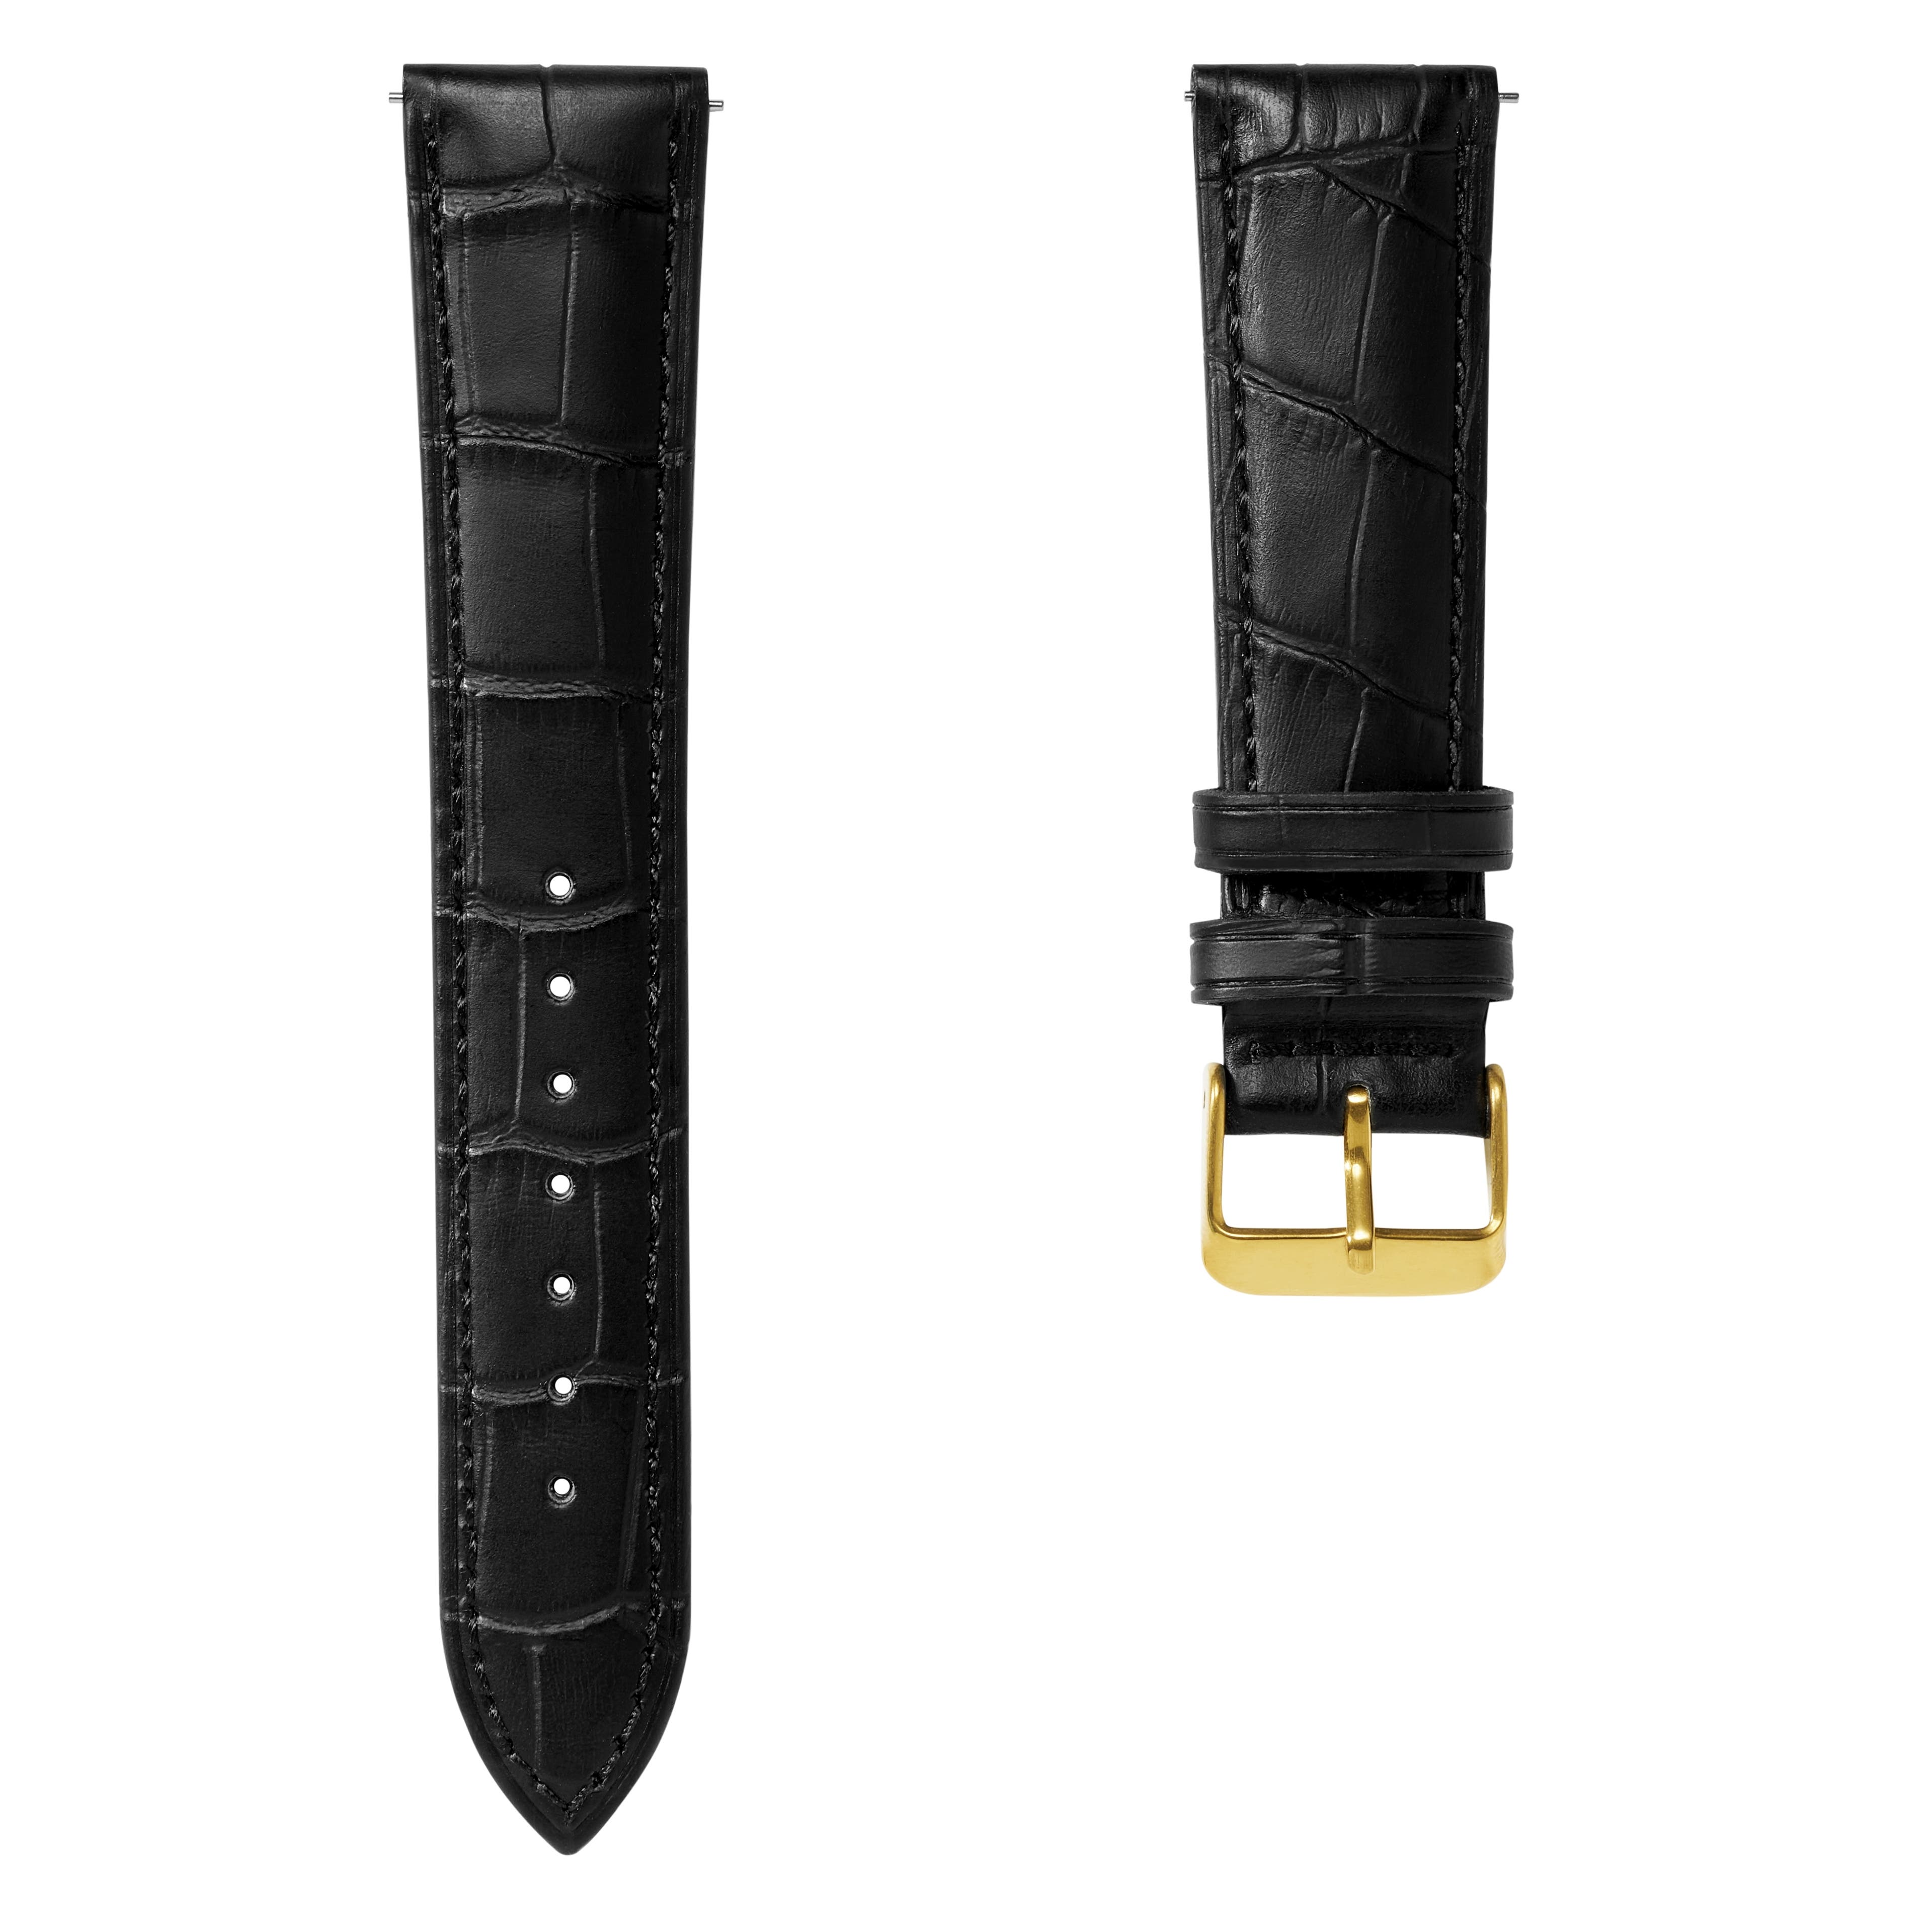 7/8" (22 mm) Crocodile-Embossed Black Leather Watch Strap with Gold-Tone Buckle – Quick Release